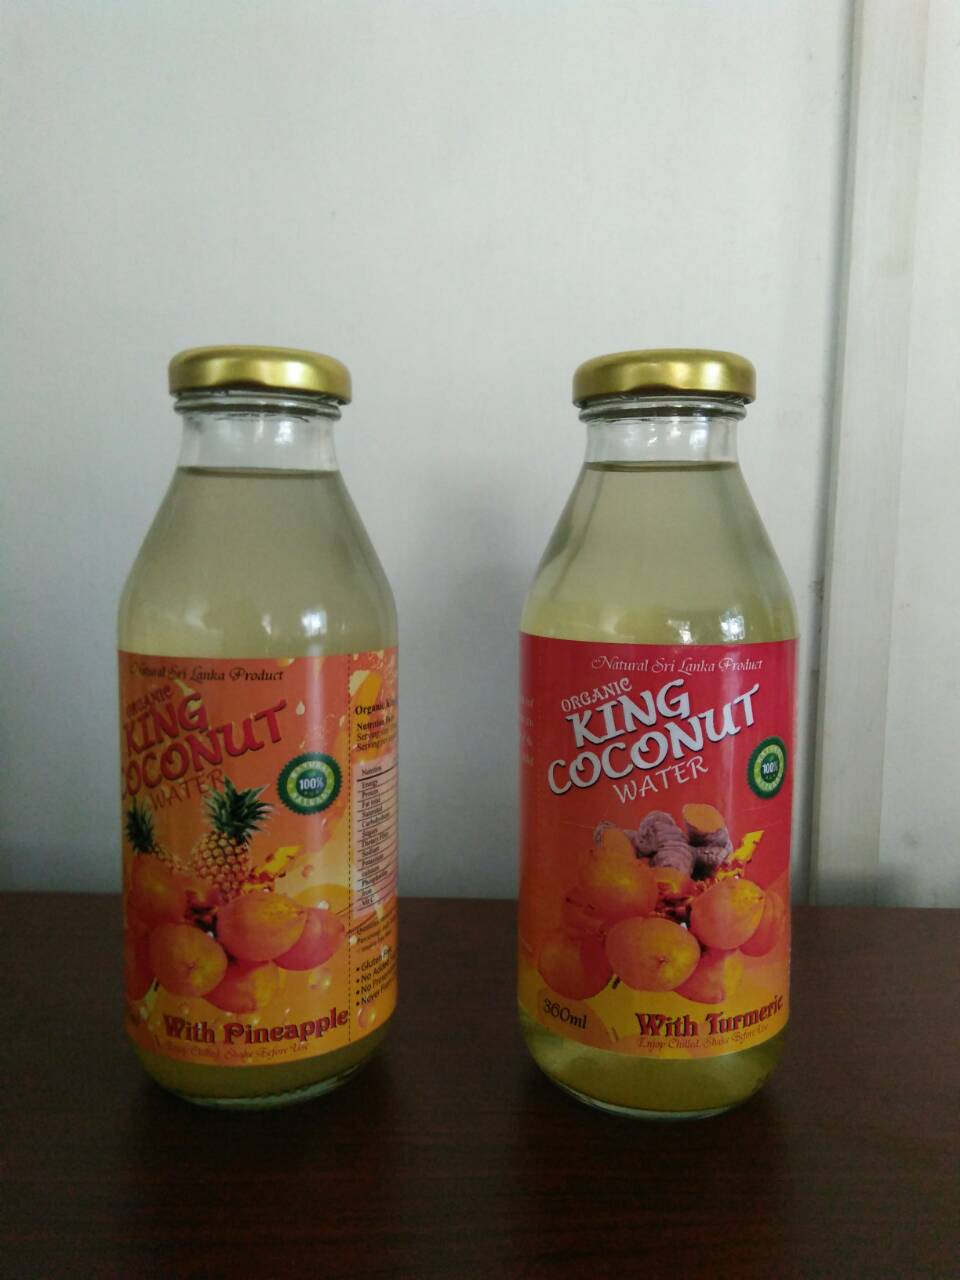 KING COCONUT WATER WITH TURMERIC